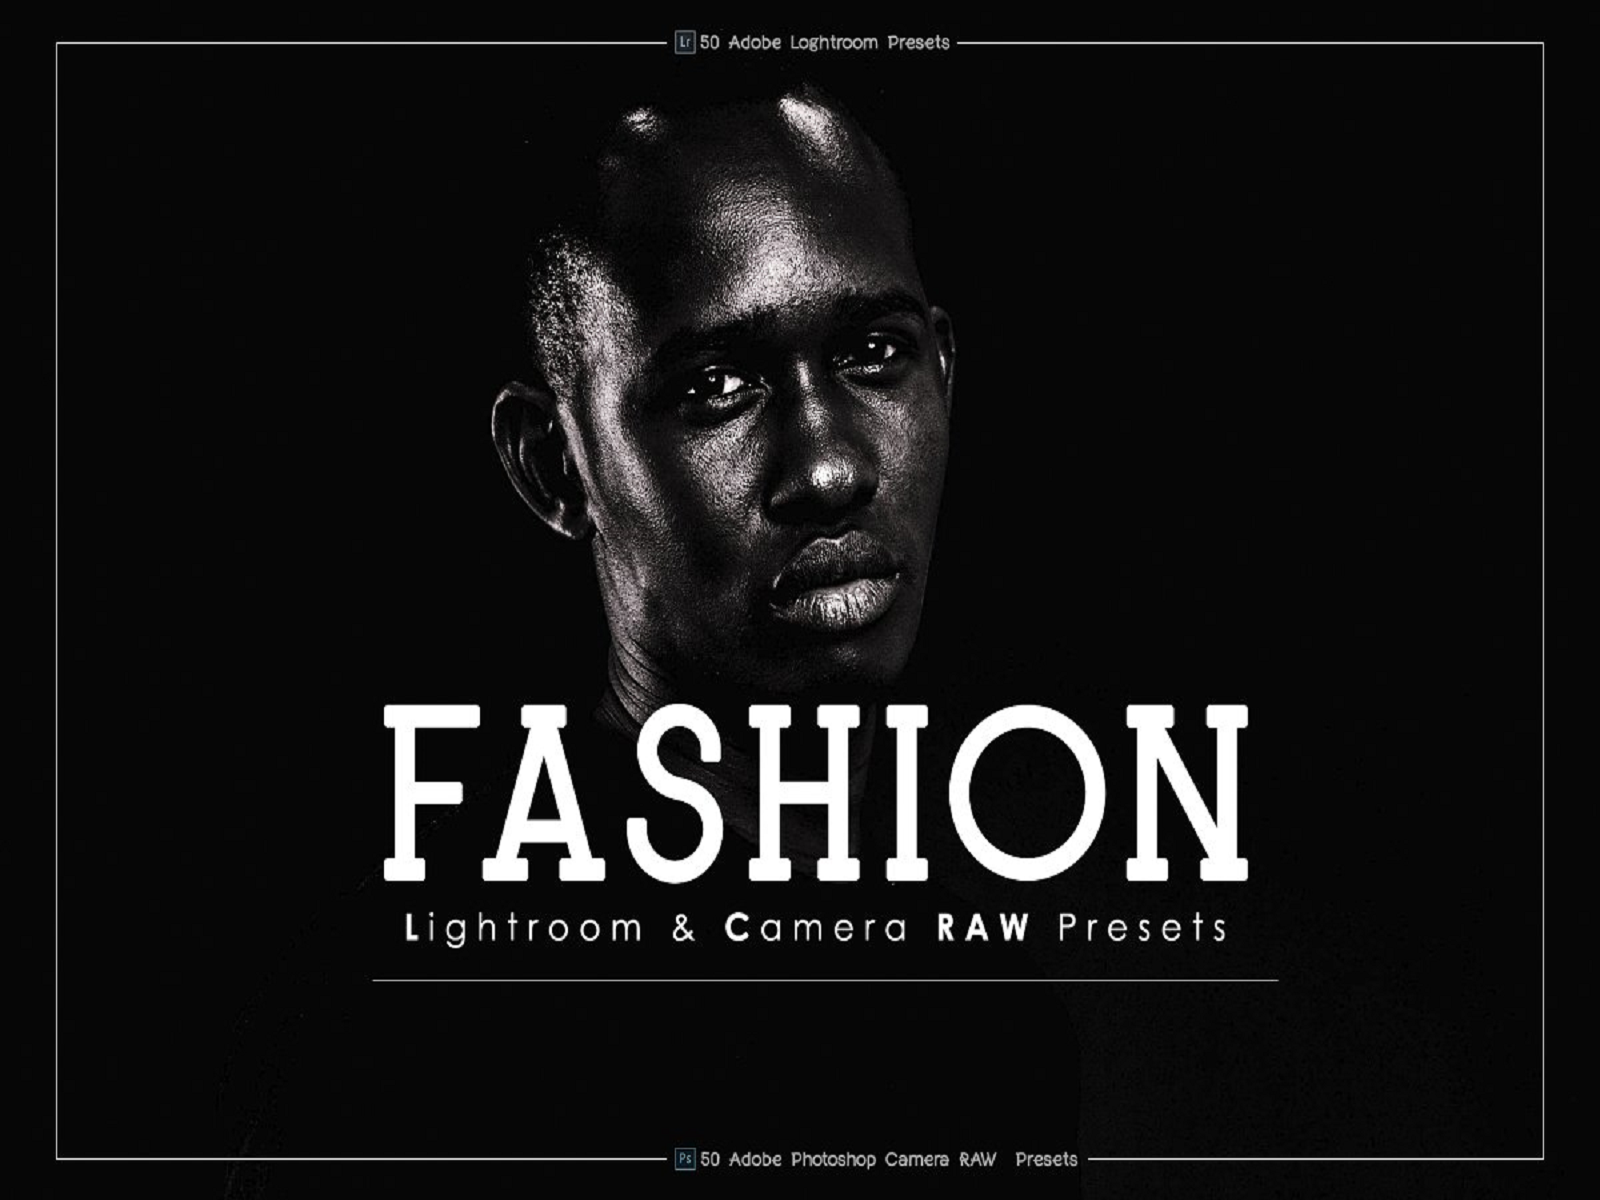 Fashion Lightroom & Photoshop Presets by Hexa on Dribbble